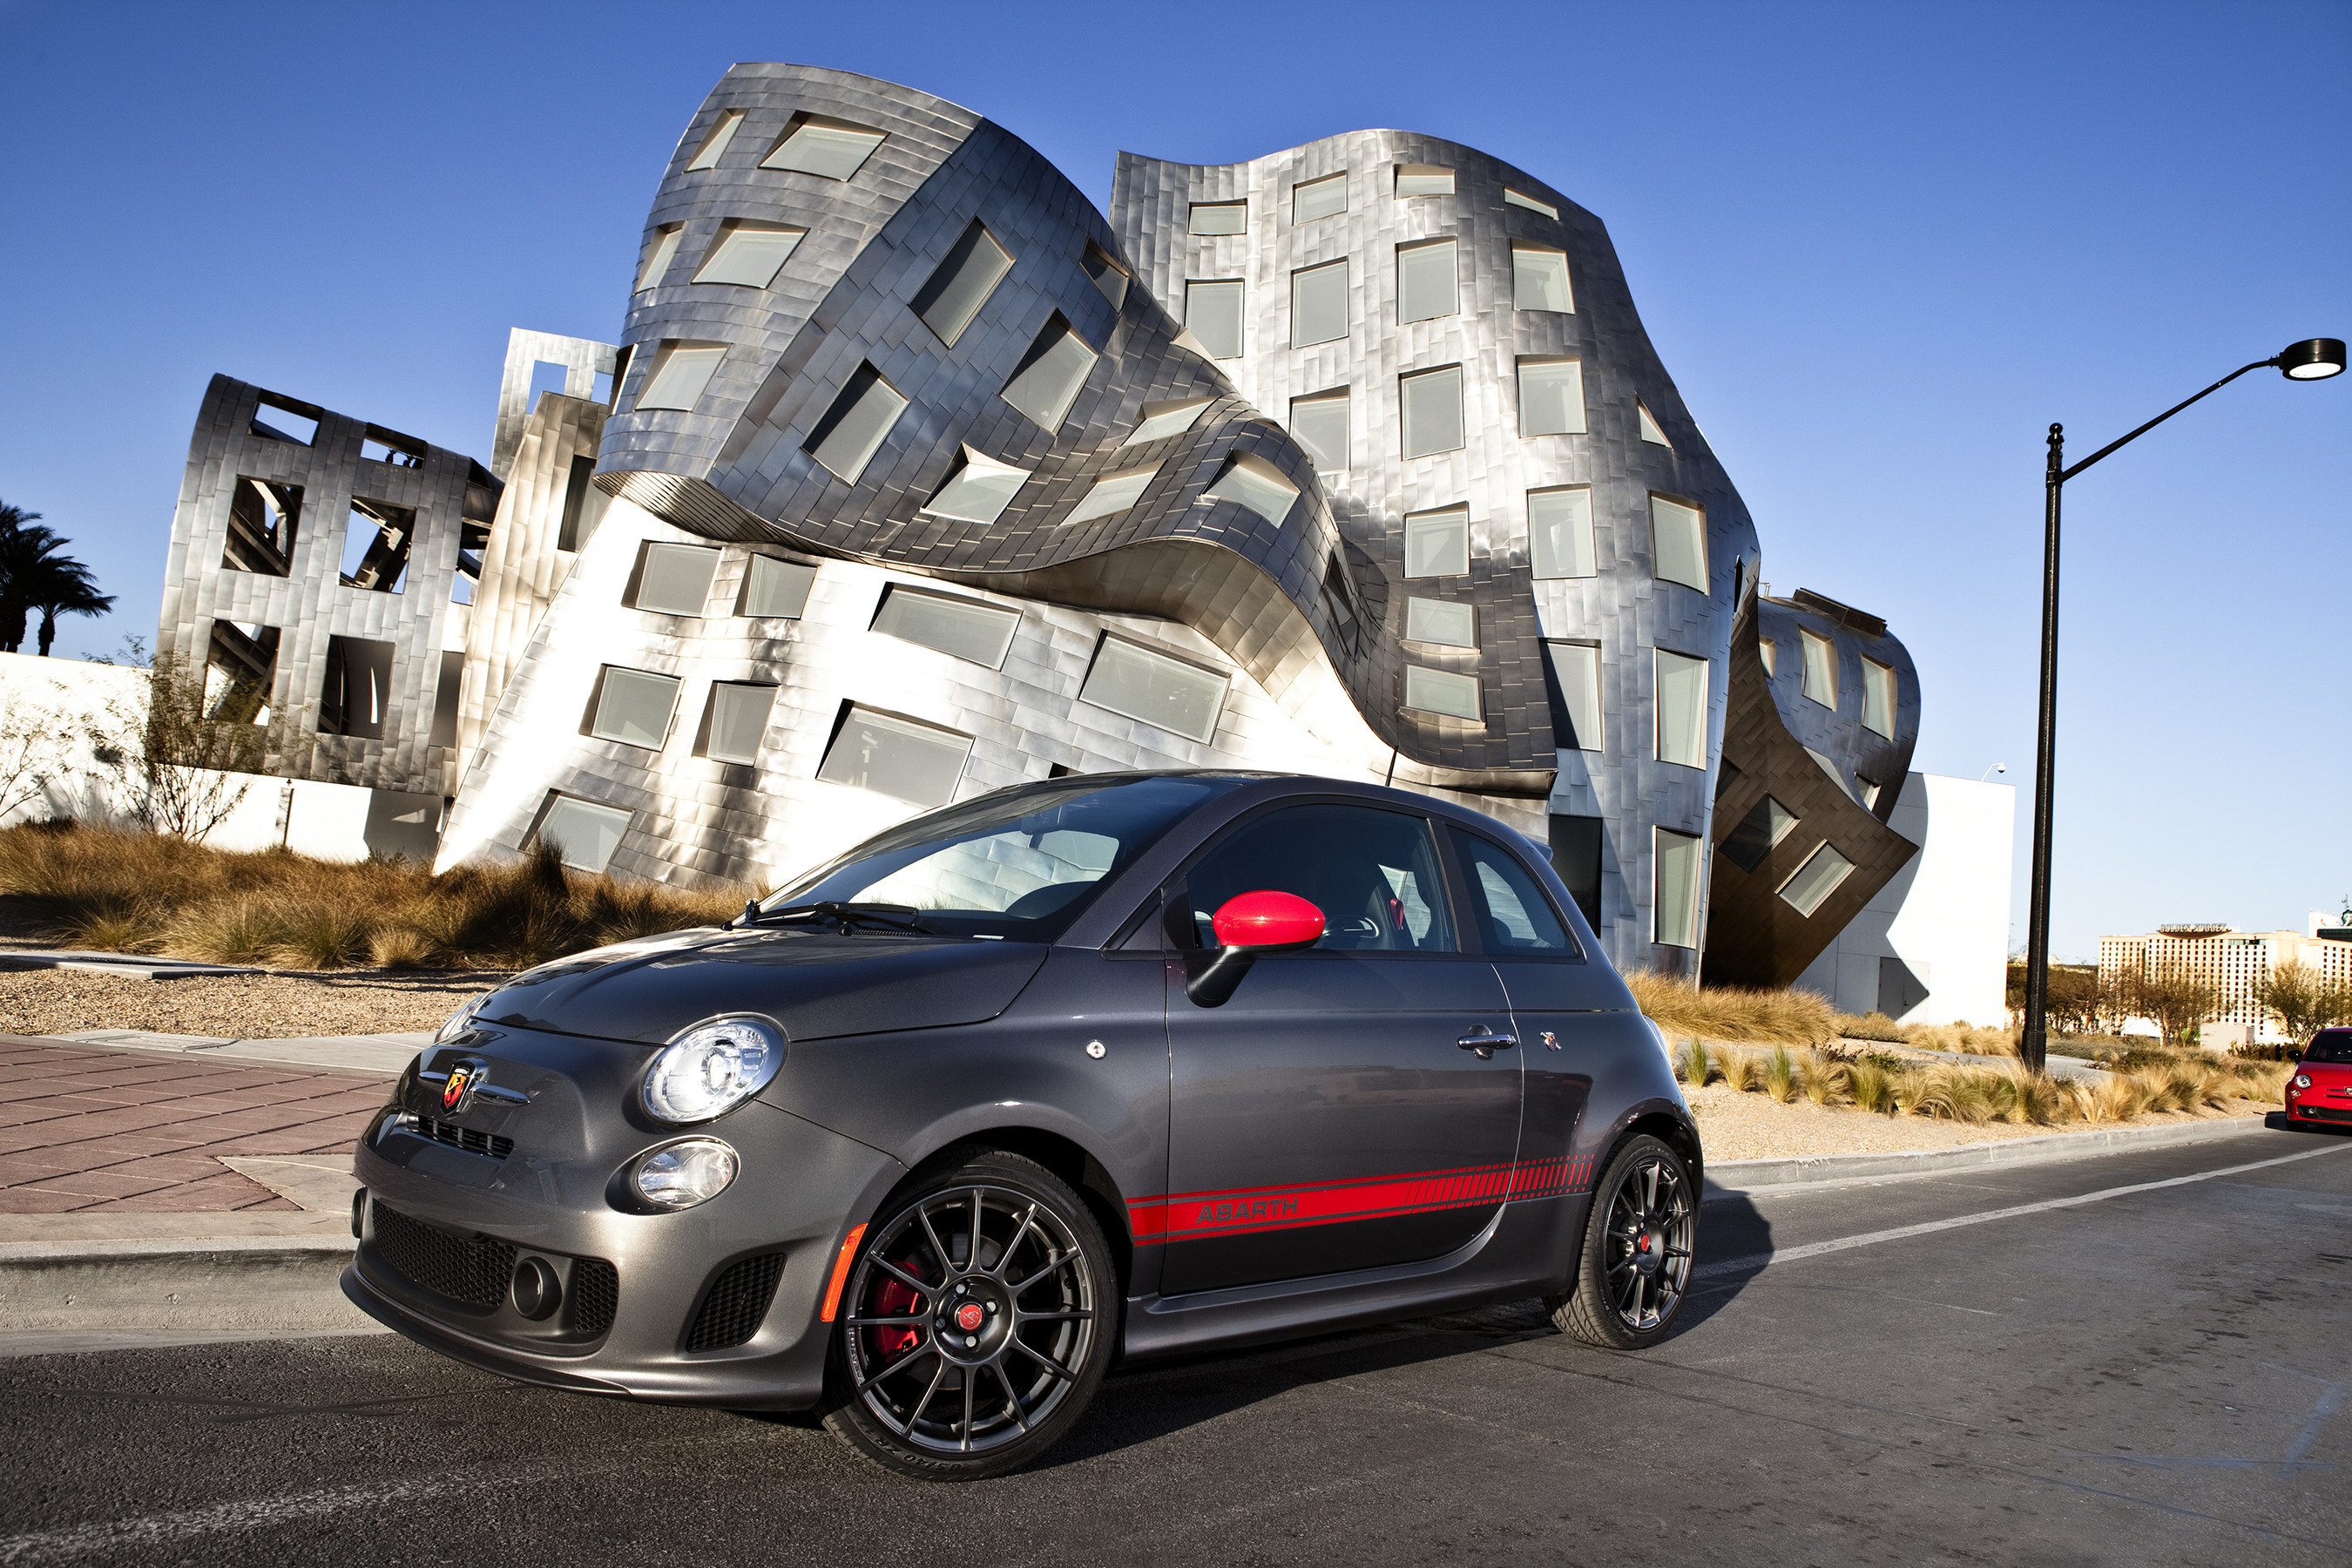 Fiat 500 Abarth Named One Of 18 S Fastest Cars For The Money